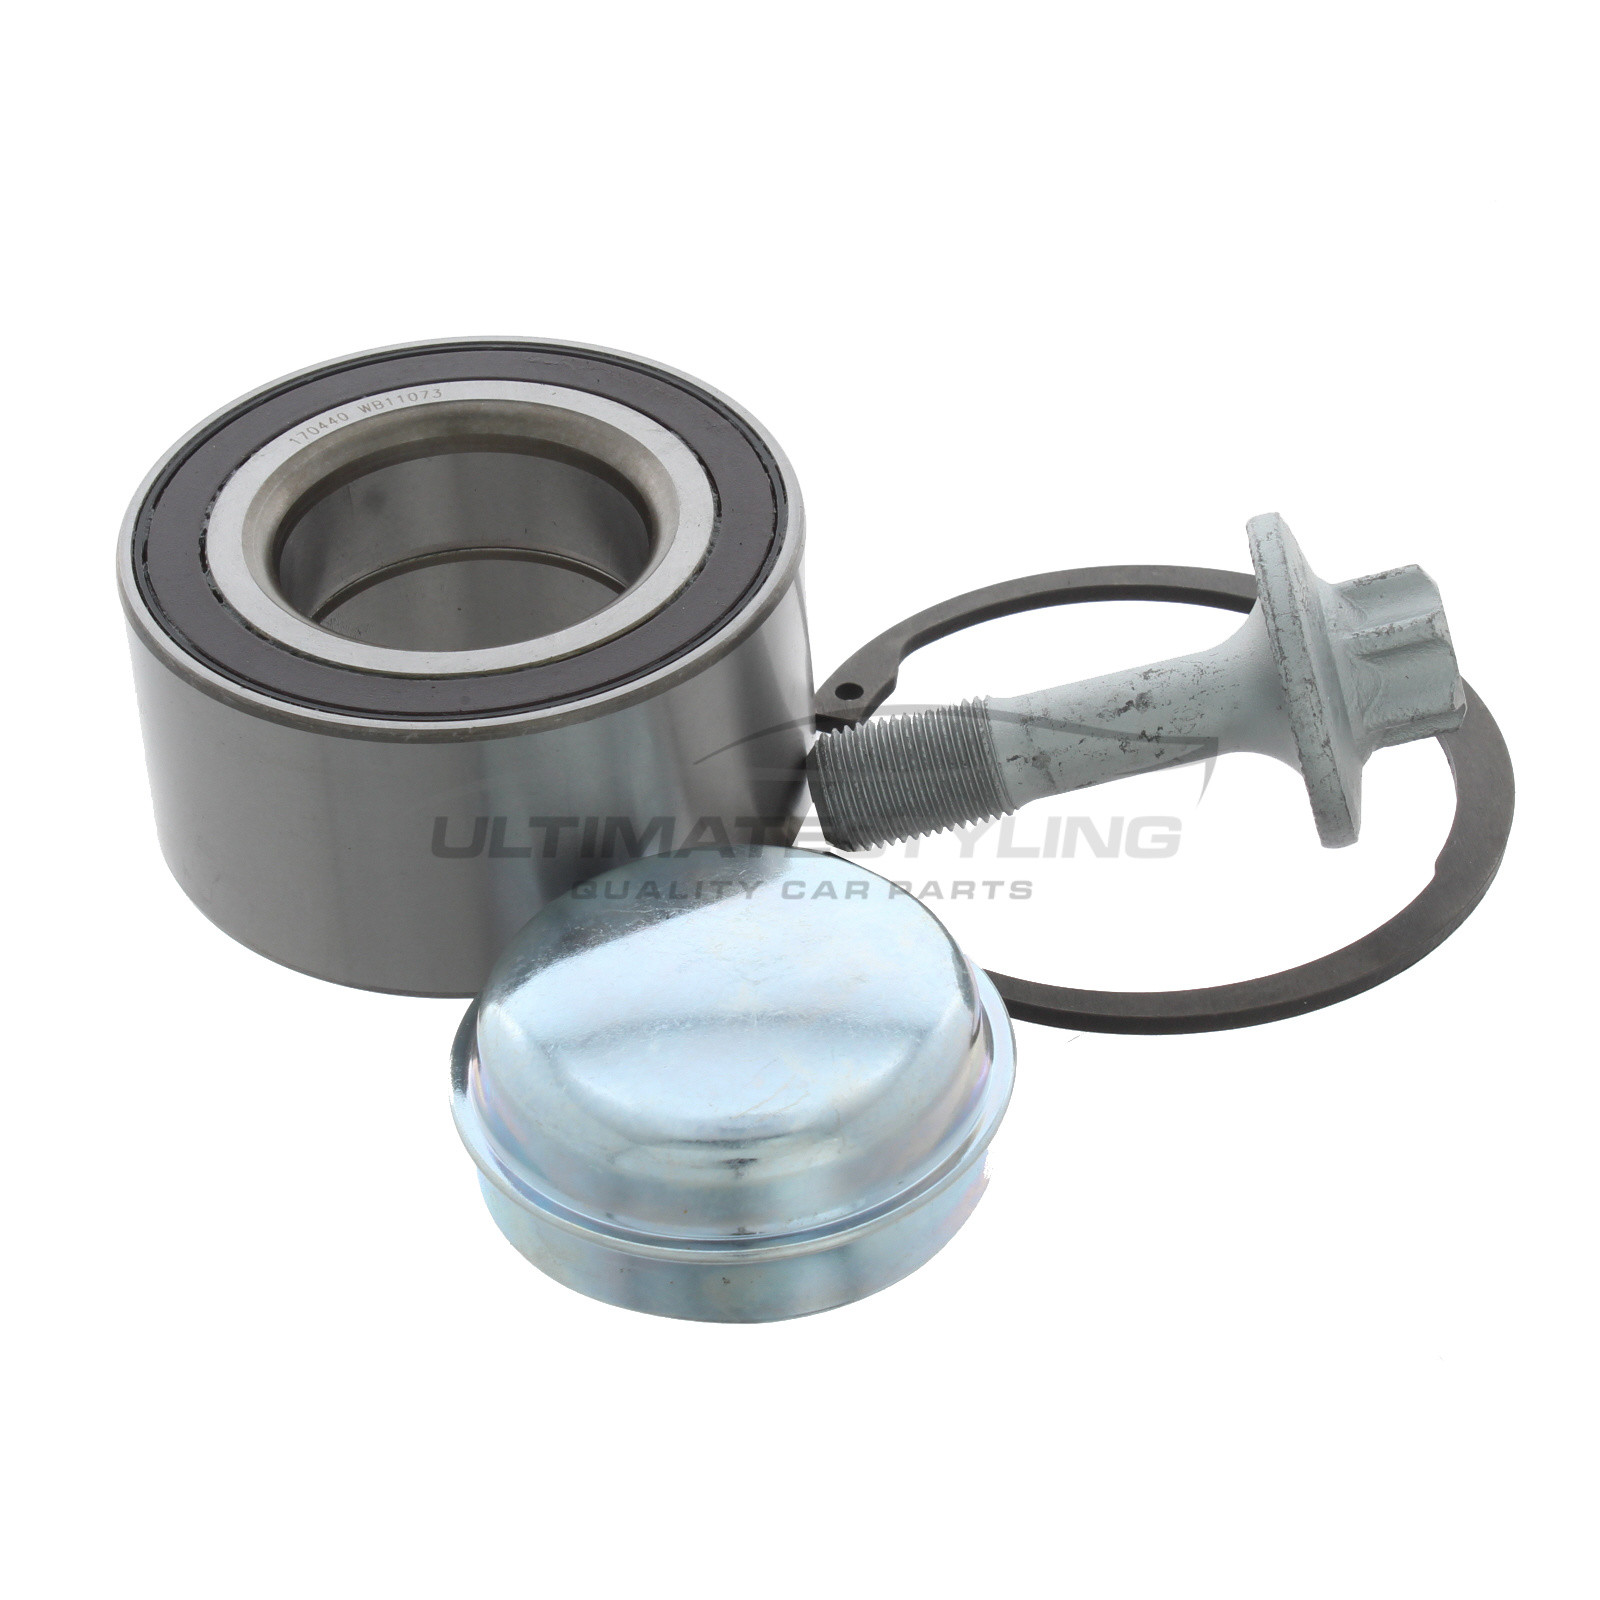 Front Wheel Bearing Kit for Mercedes Benz GLA Class